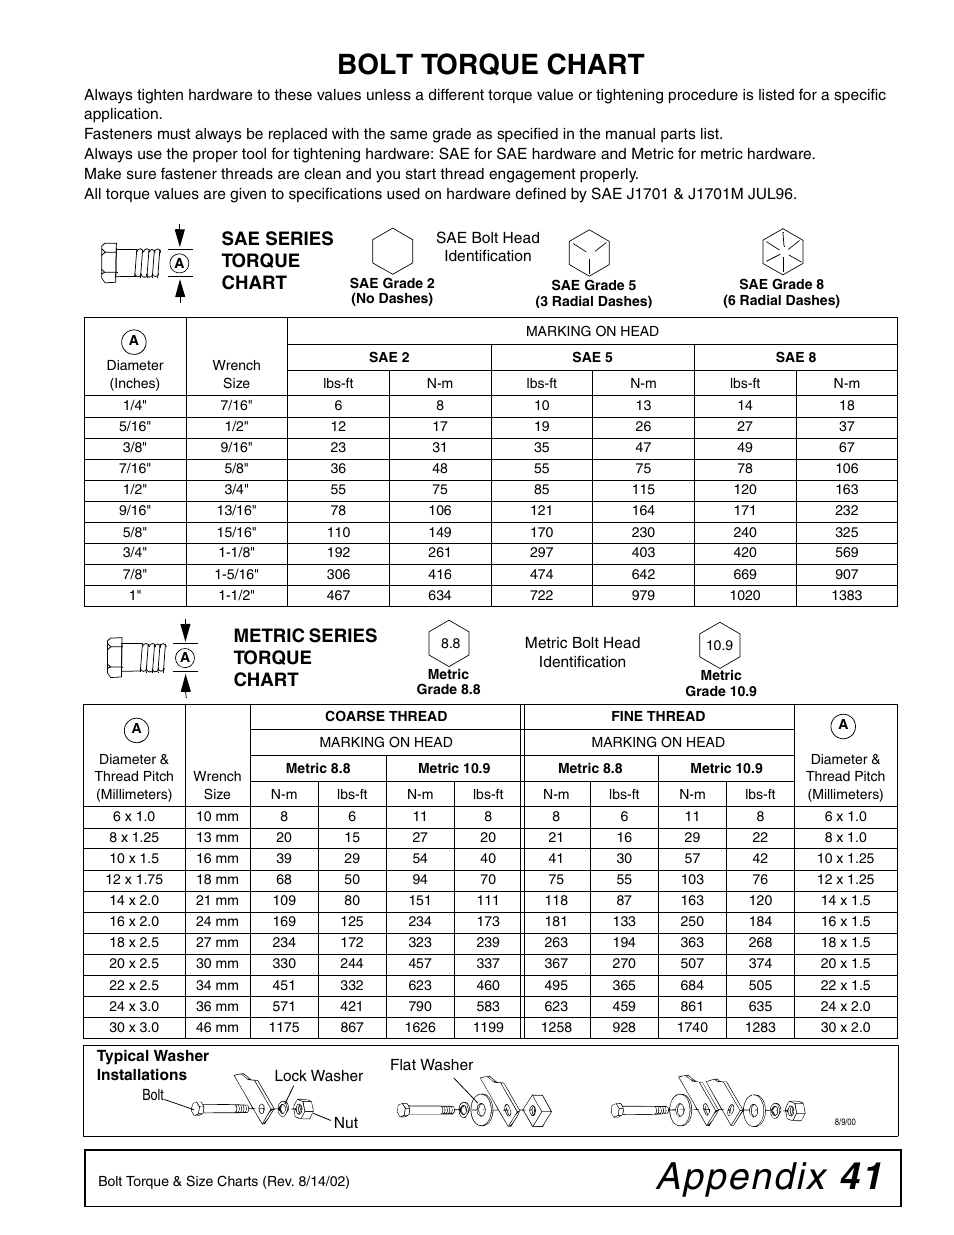 Recommended Bolt Torque Chart